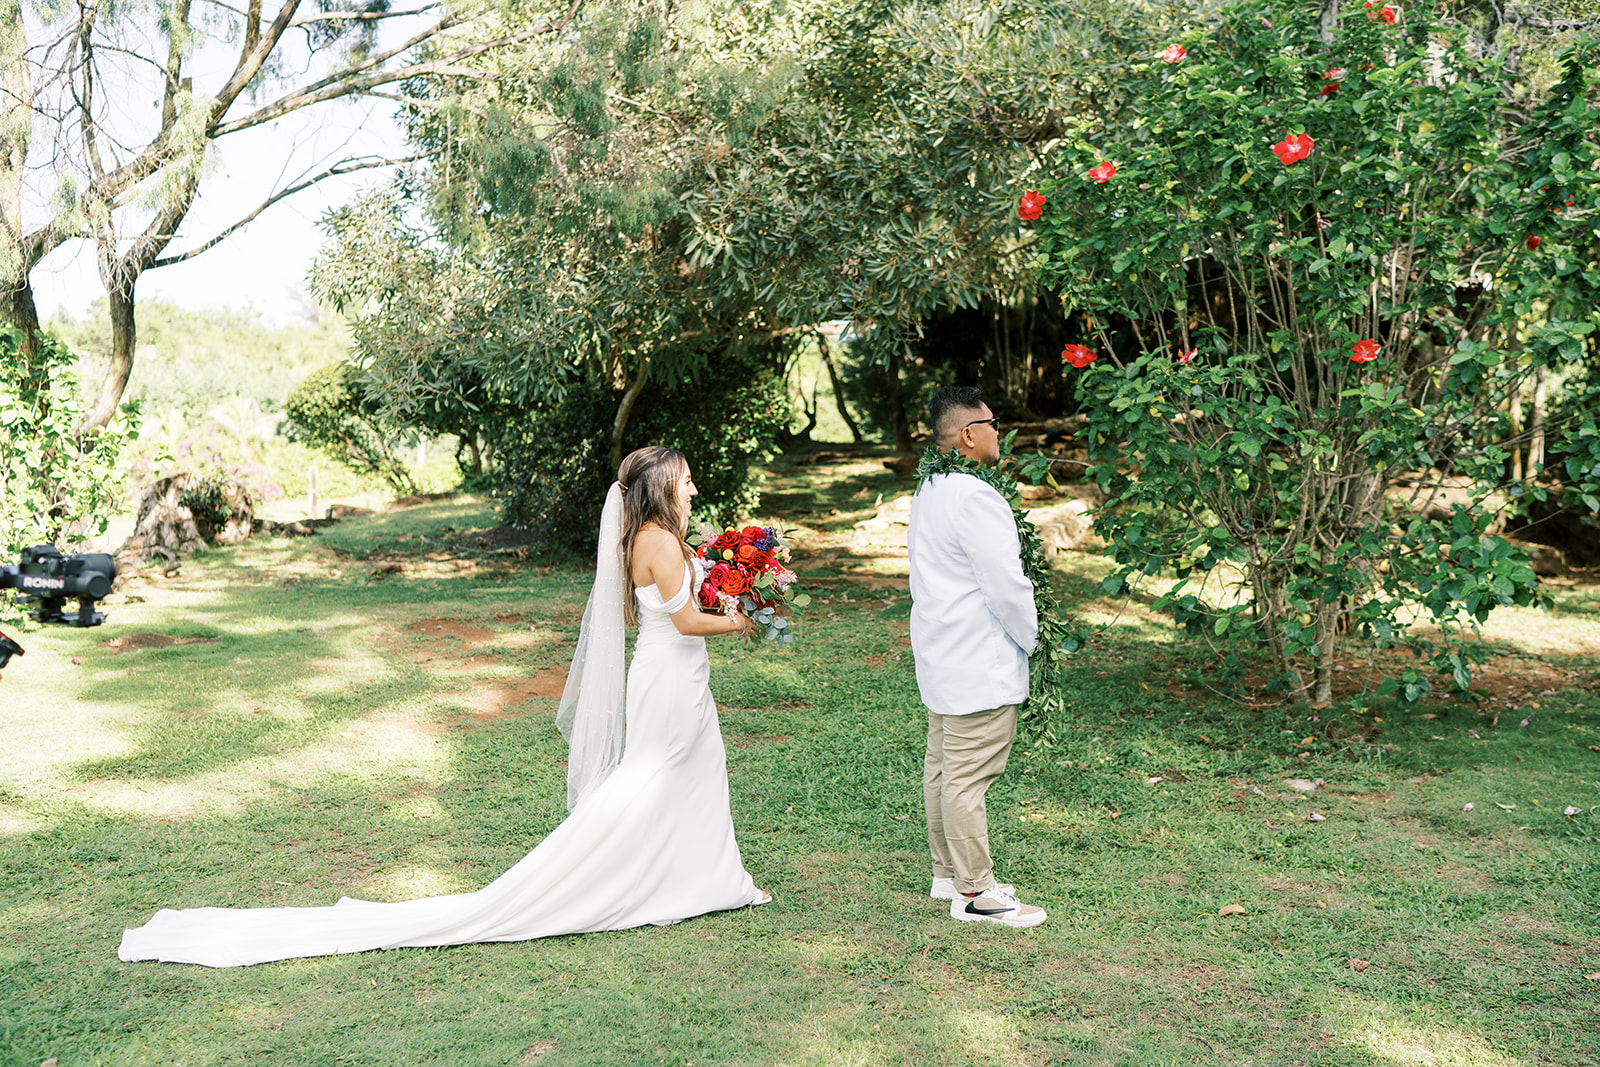 Bride and groom participating in a "first look" moment in a garden setting captured by Megan Moura Wedding Photographer